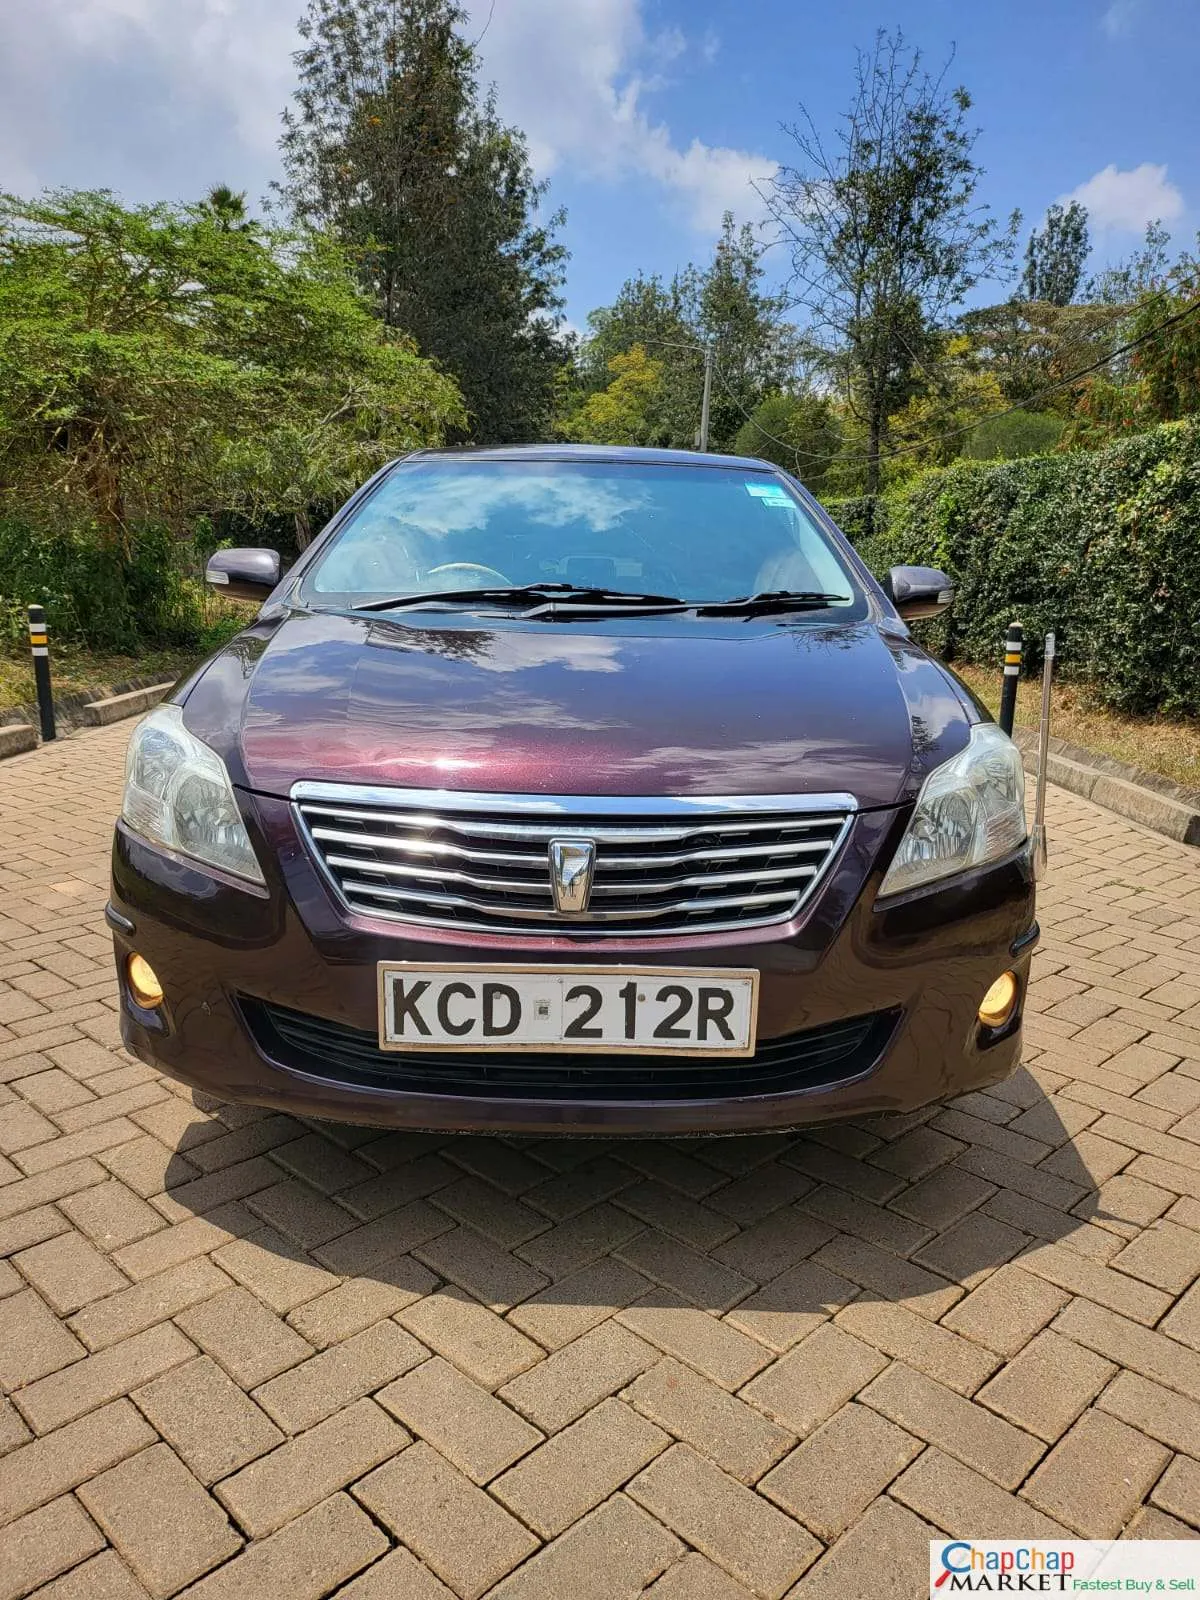 Toyota PREMIO new shape You pay 30% Deposit Trade in Ok EXCLUSIVE premio for sale in kenya hire purchase installments